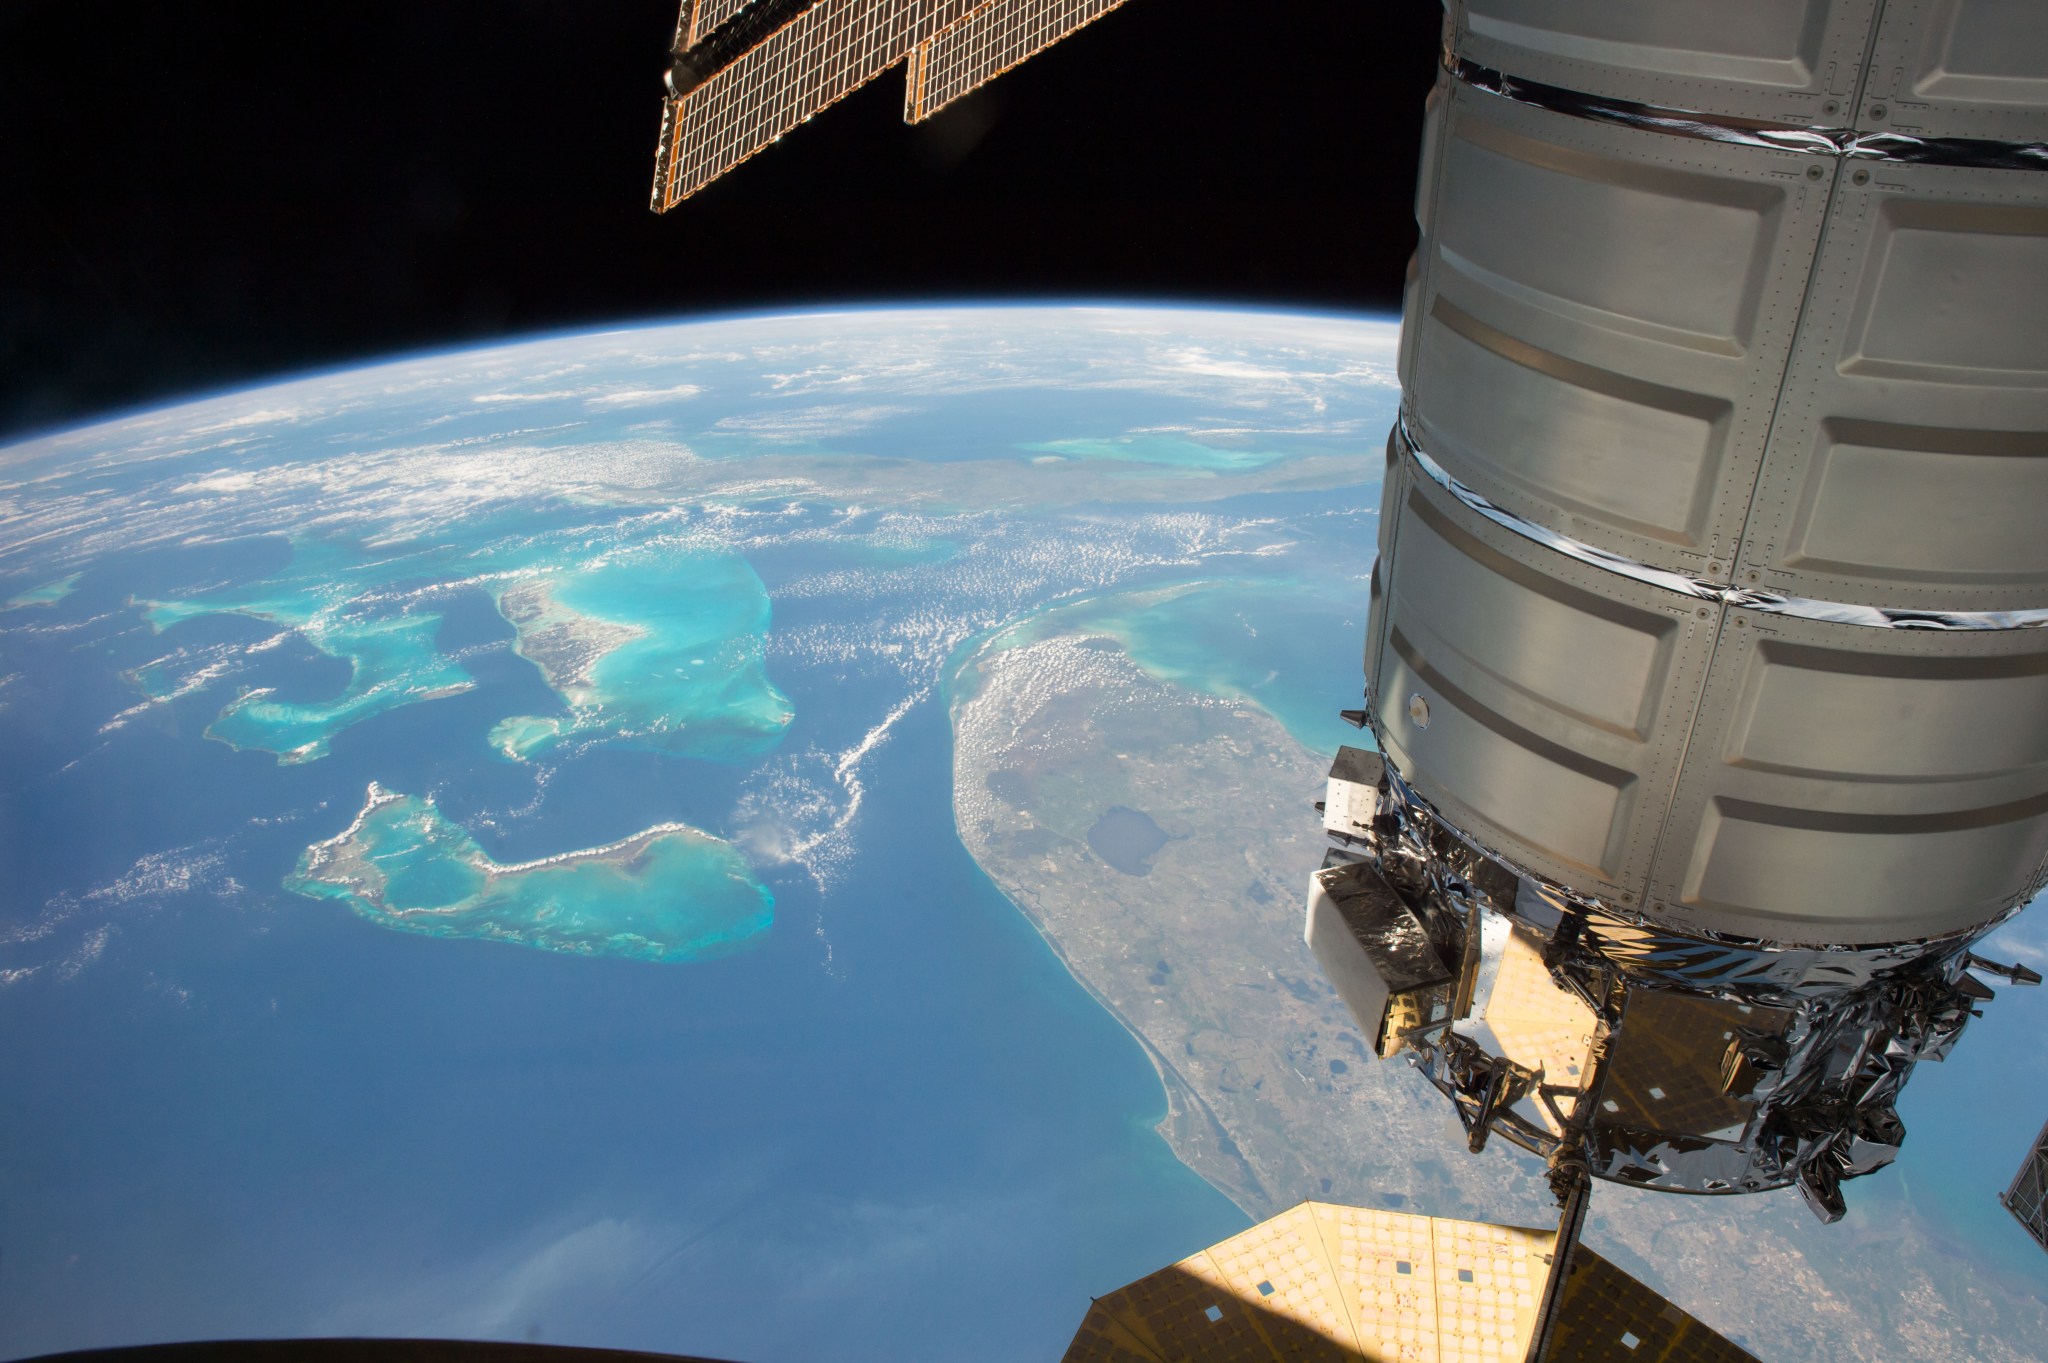 The Orbital ATK Cygnus cargo craft is pictured as the International Space Station orbits above Florida, The Bahamas and Cuba